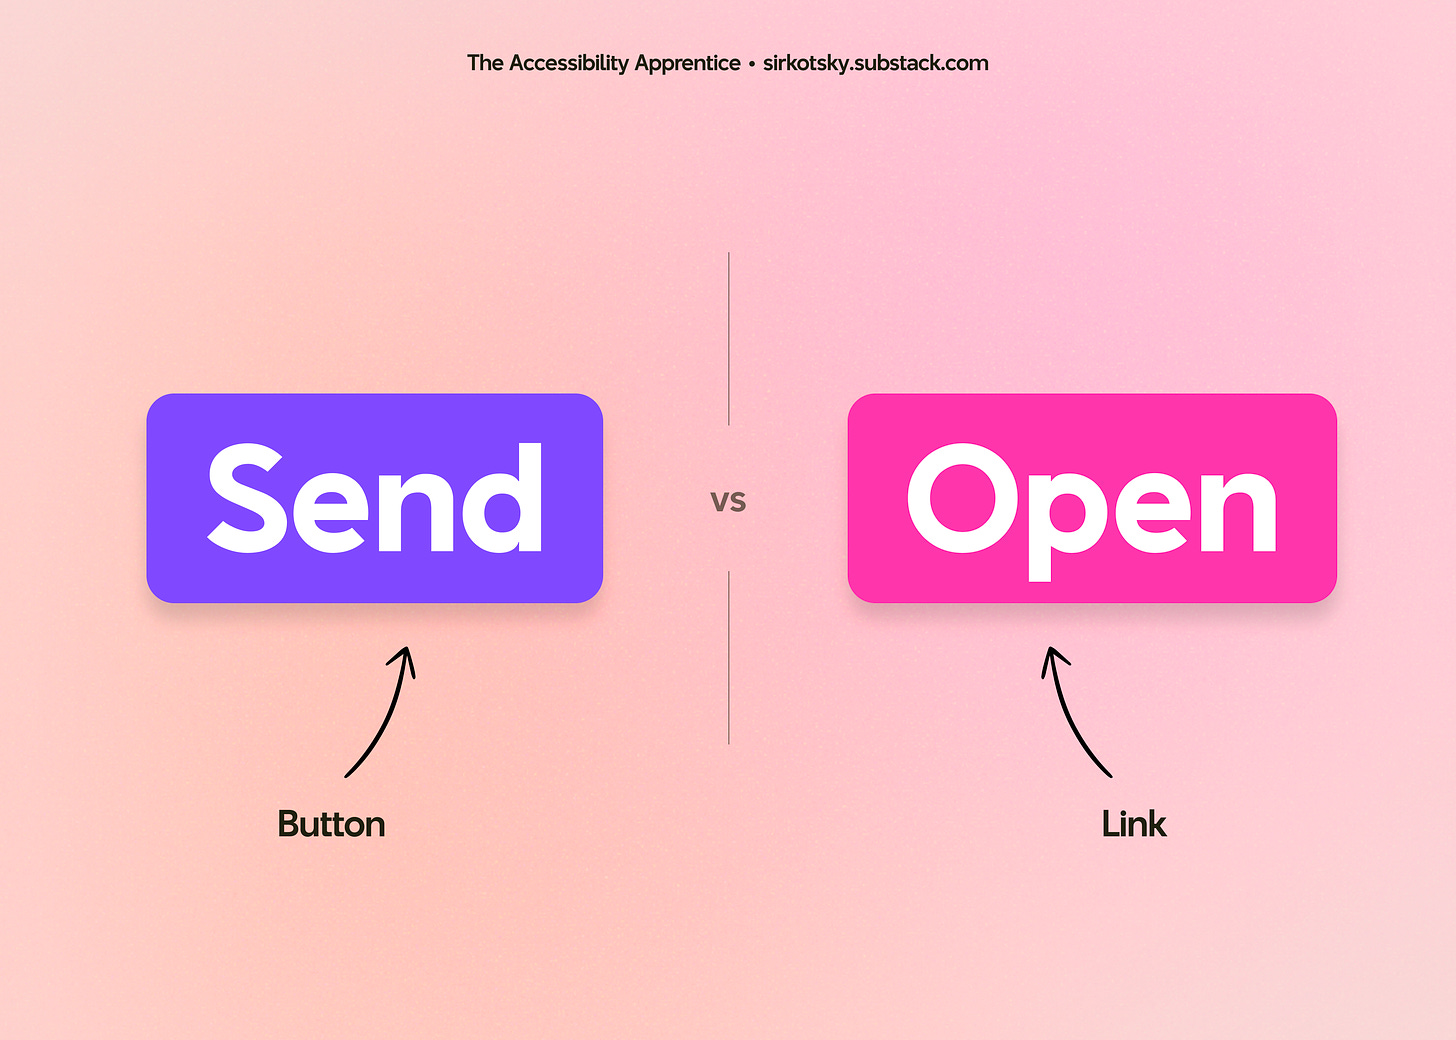 On the left, "Send" button. On the right, "Open" button. Both are identical in styling, but the left one is indeed a button, and the right one is a link.